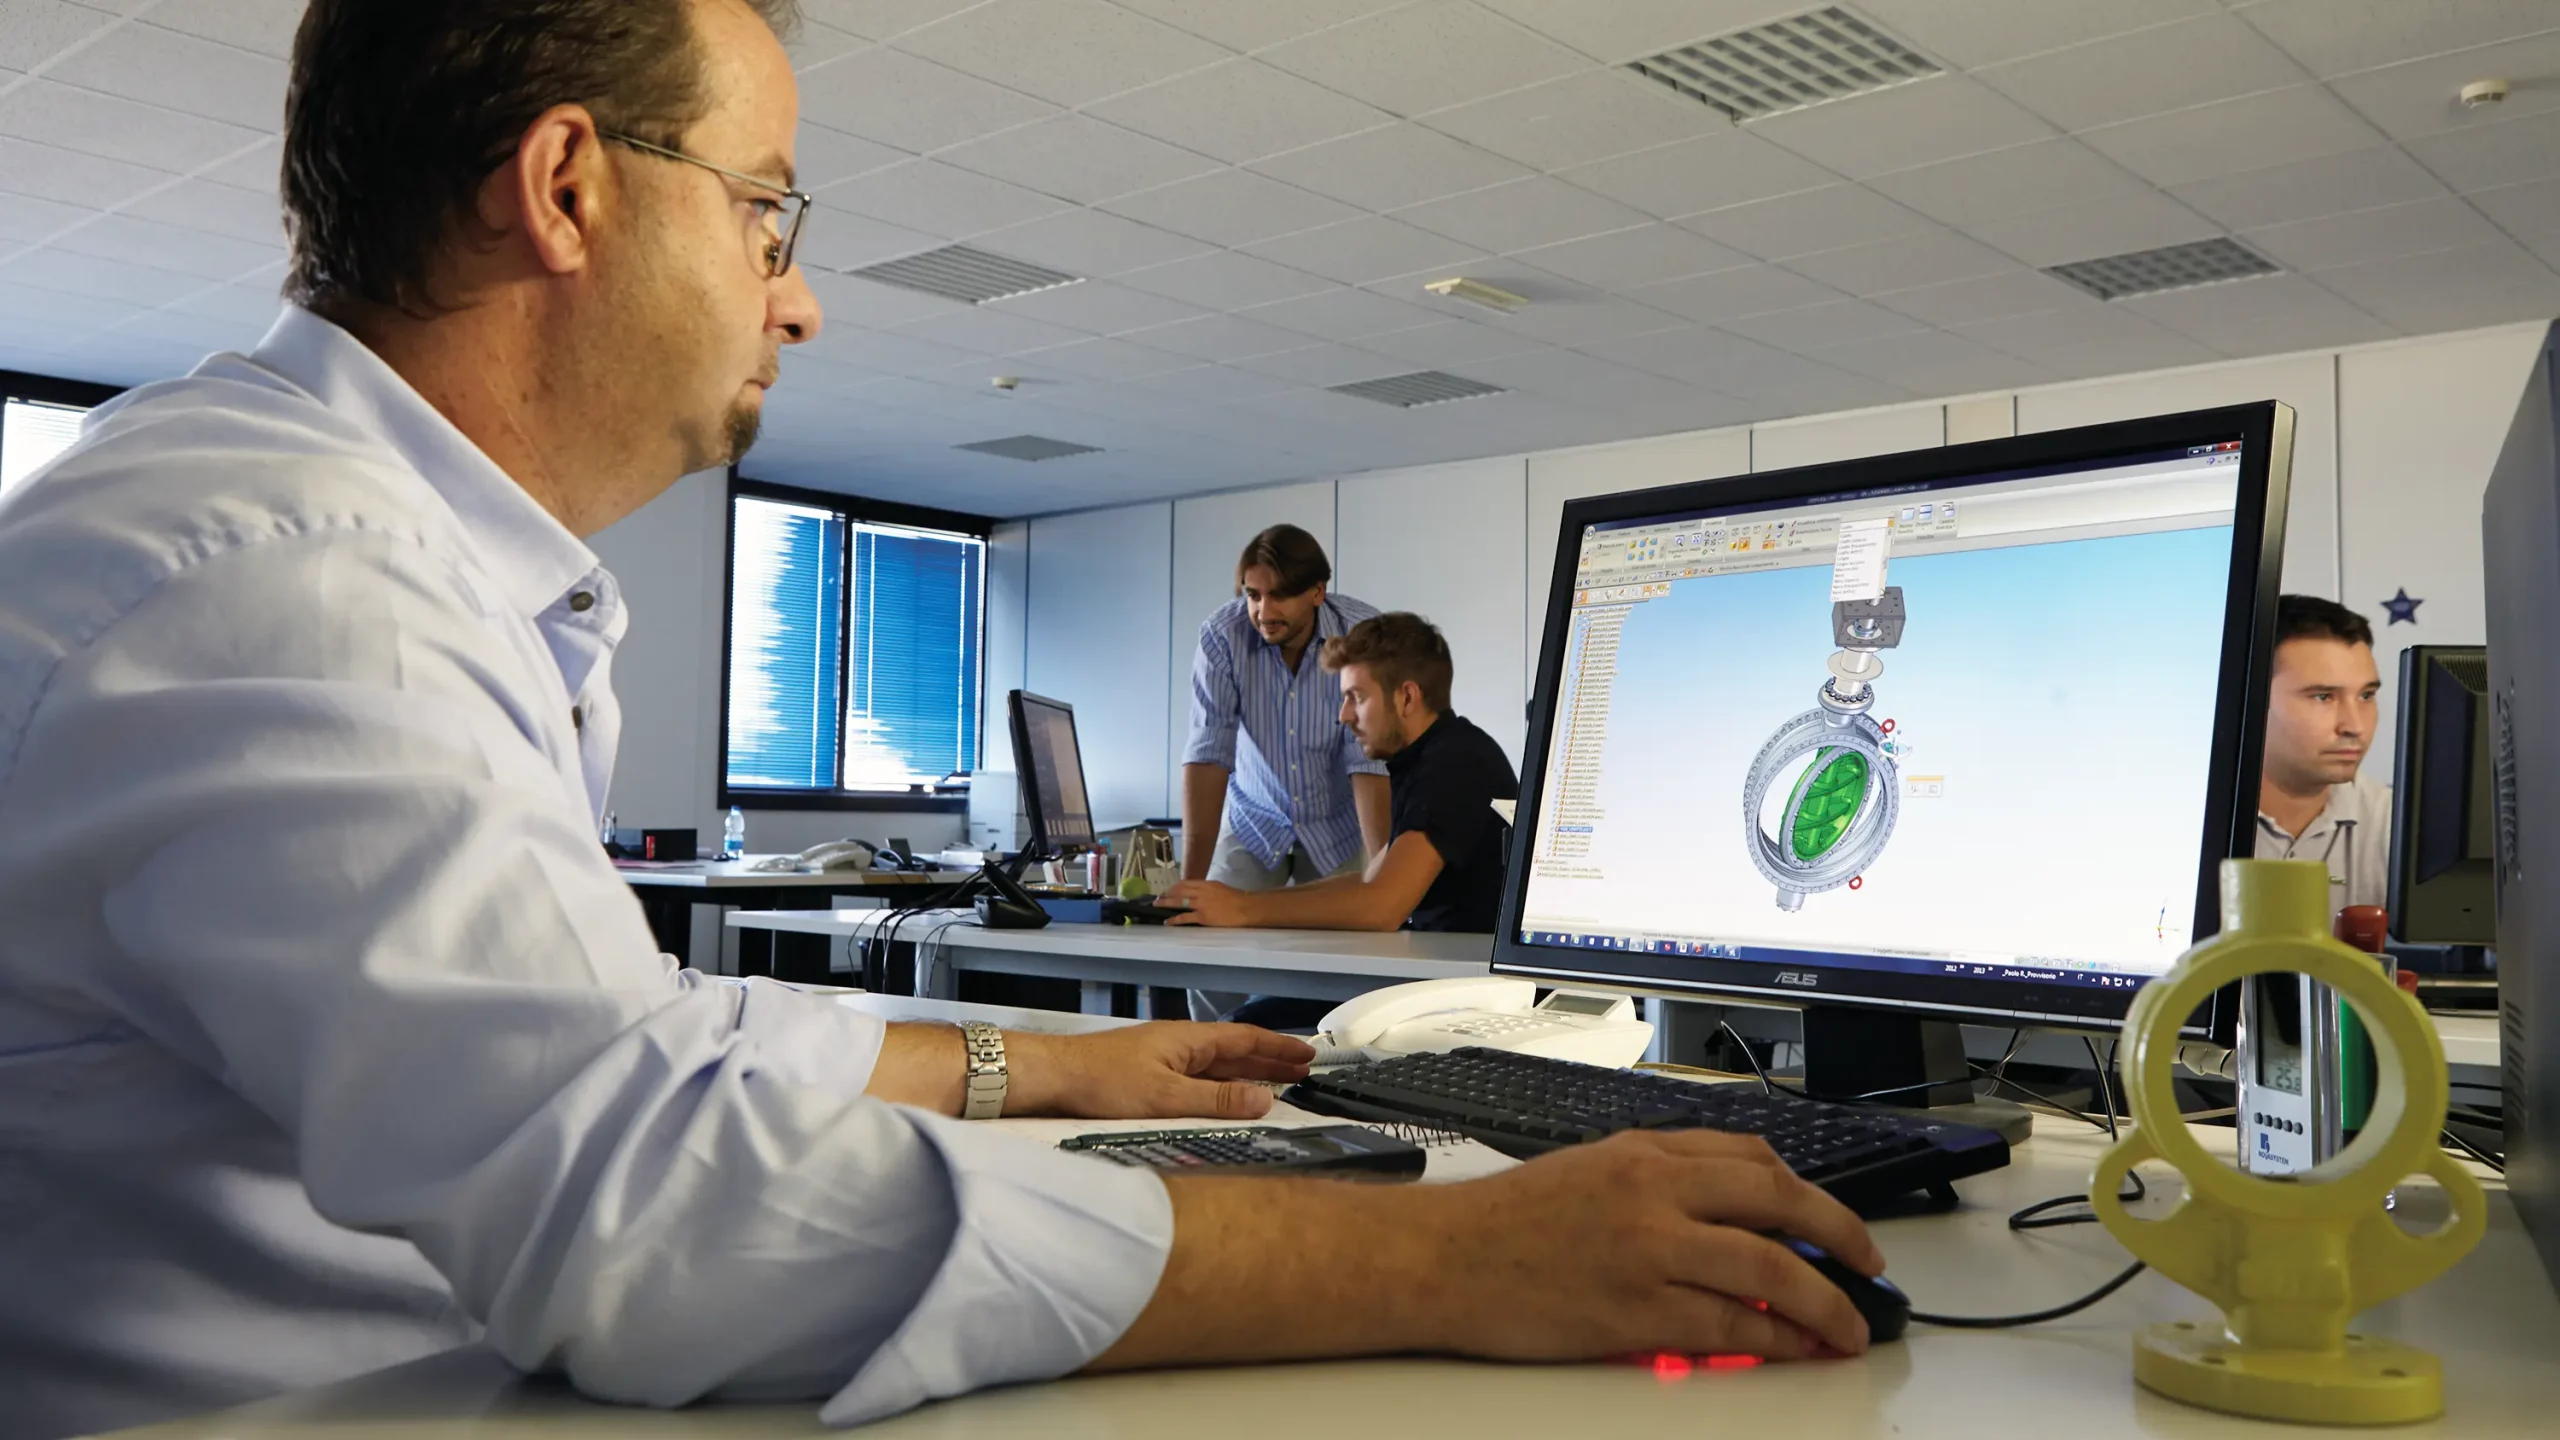 IMI Orton engineer using cutting-edge software to design a triple eccentric butterfly valve, showcasing precision engineering at their Italy site.